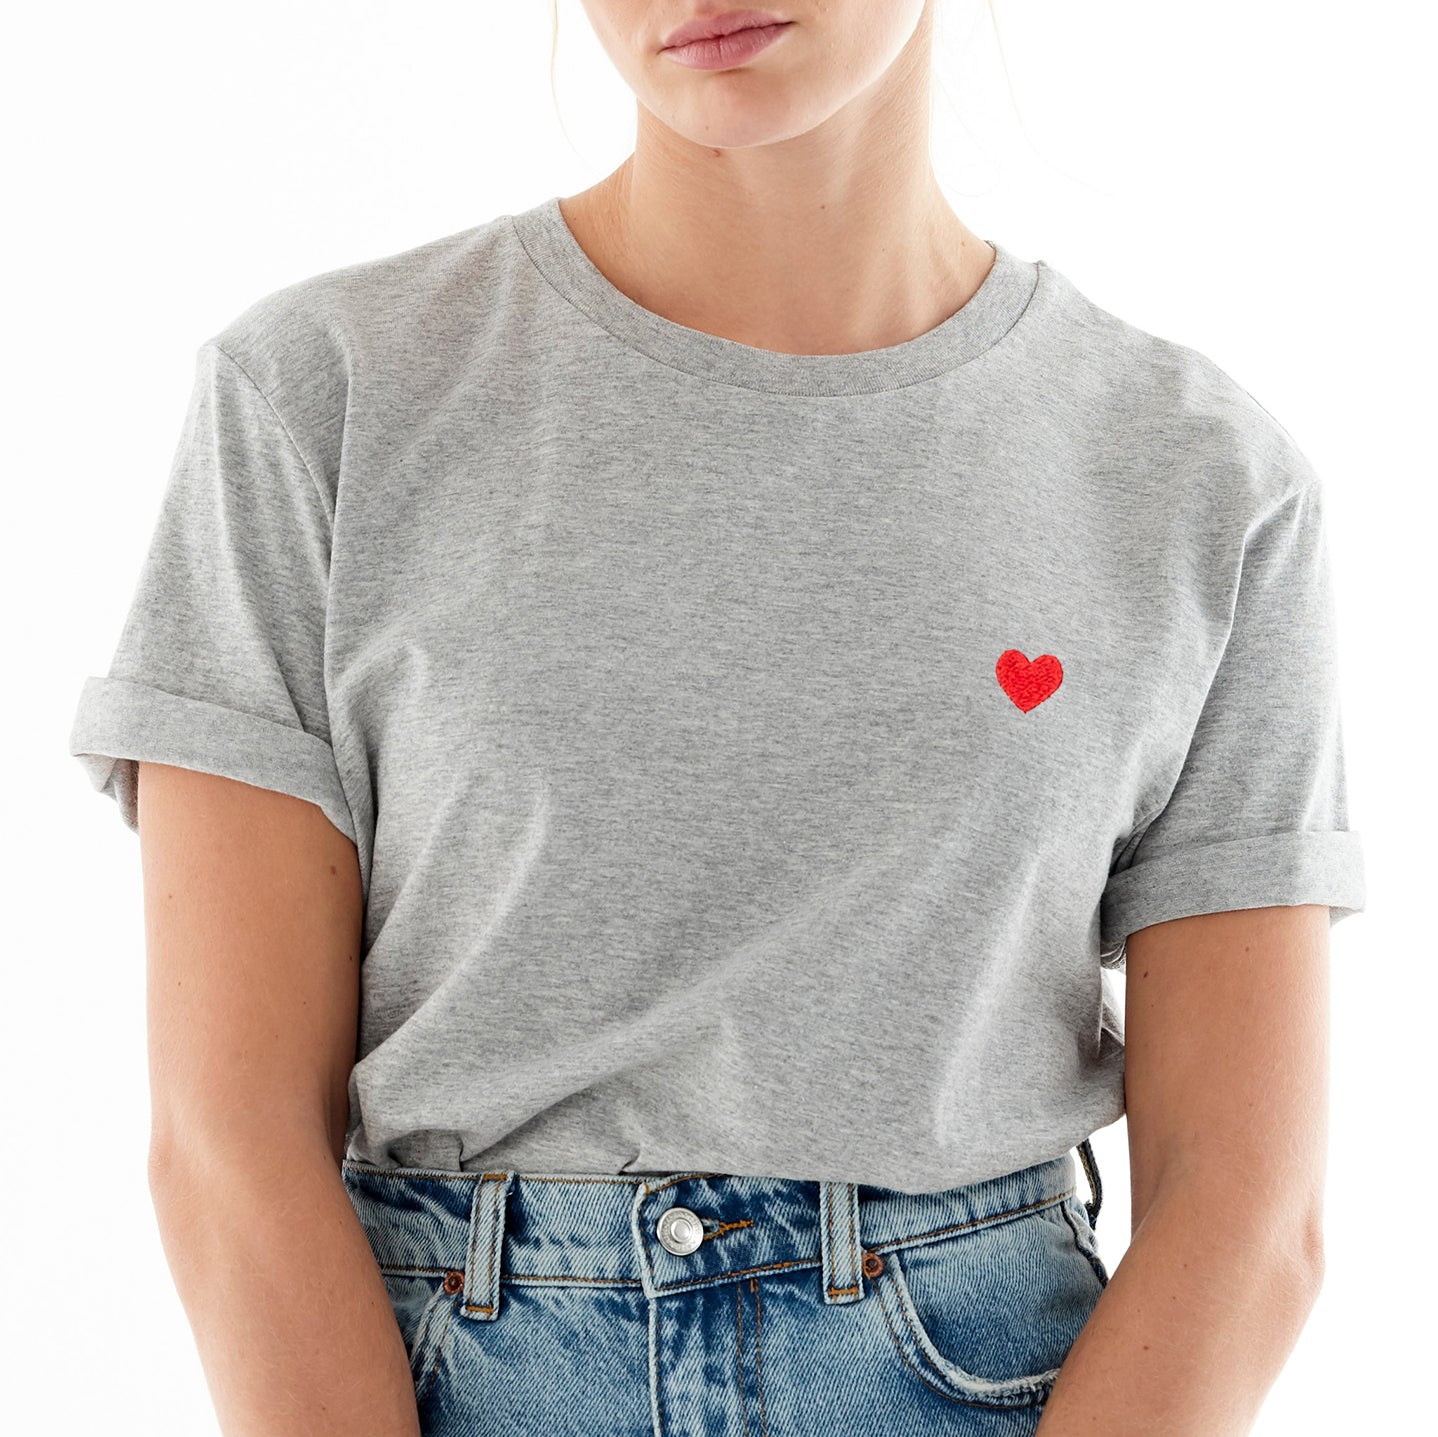 Heart Embroidered ANCLADEMAR T-Shirt. Set of 3